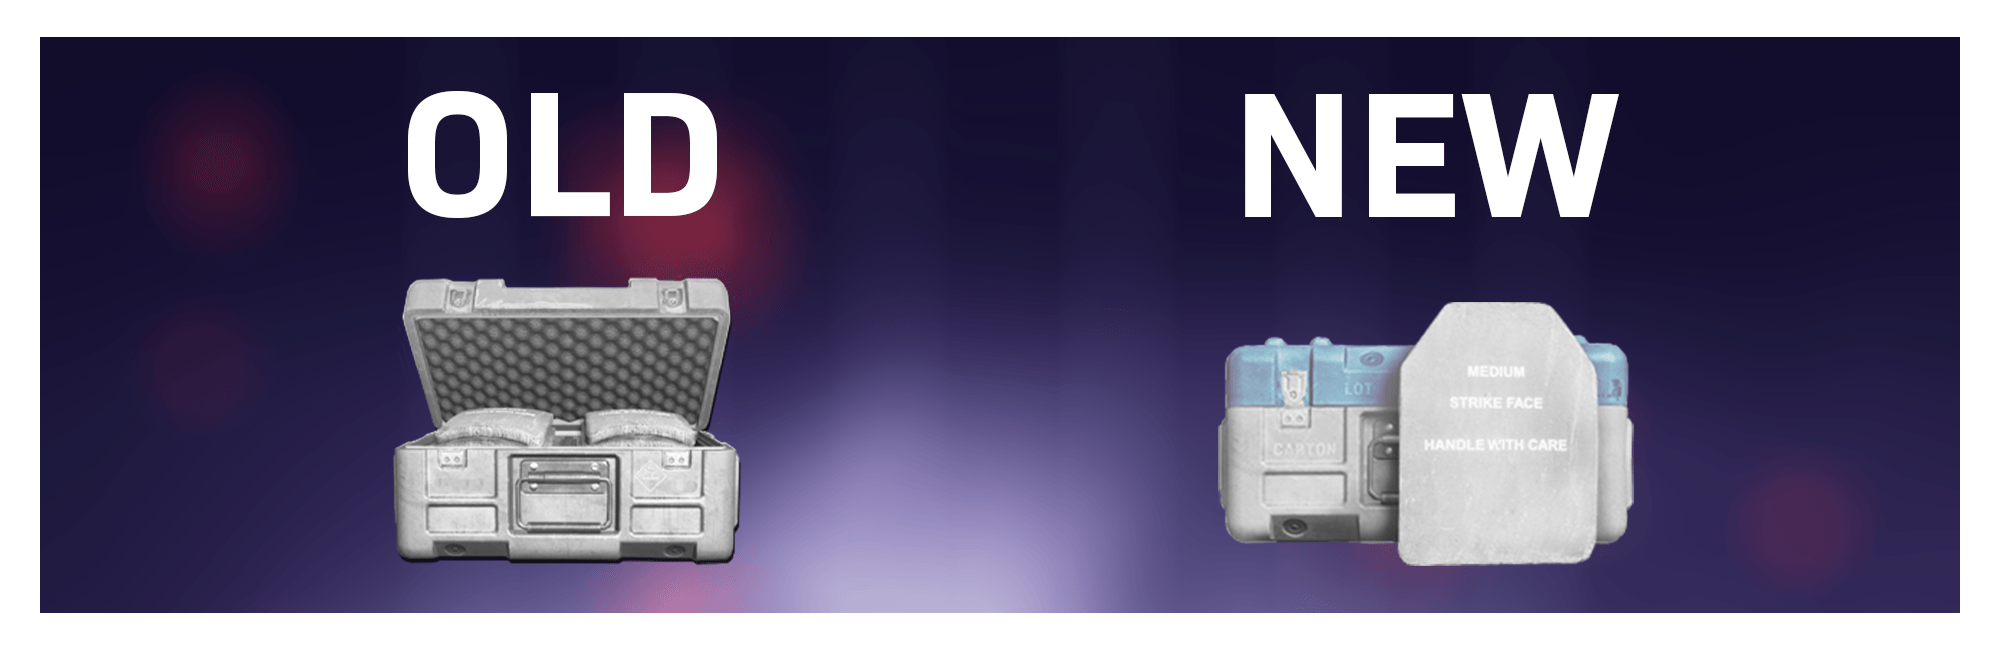 Banner showing the old and new icons for Armor Boxes.